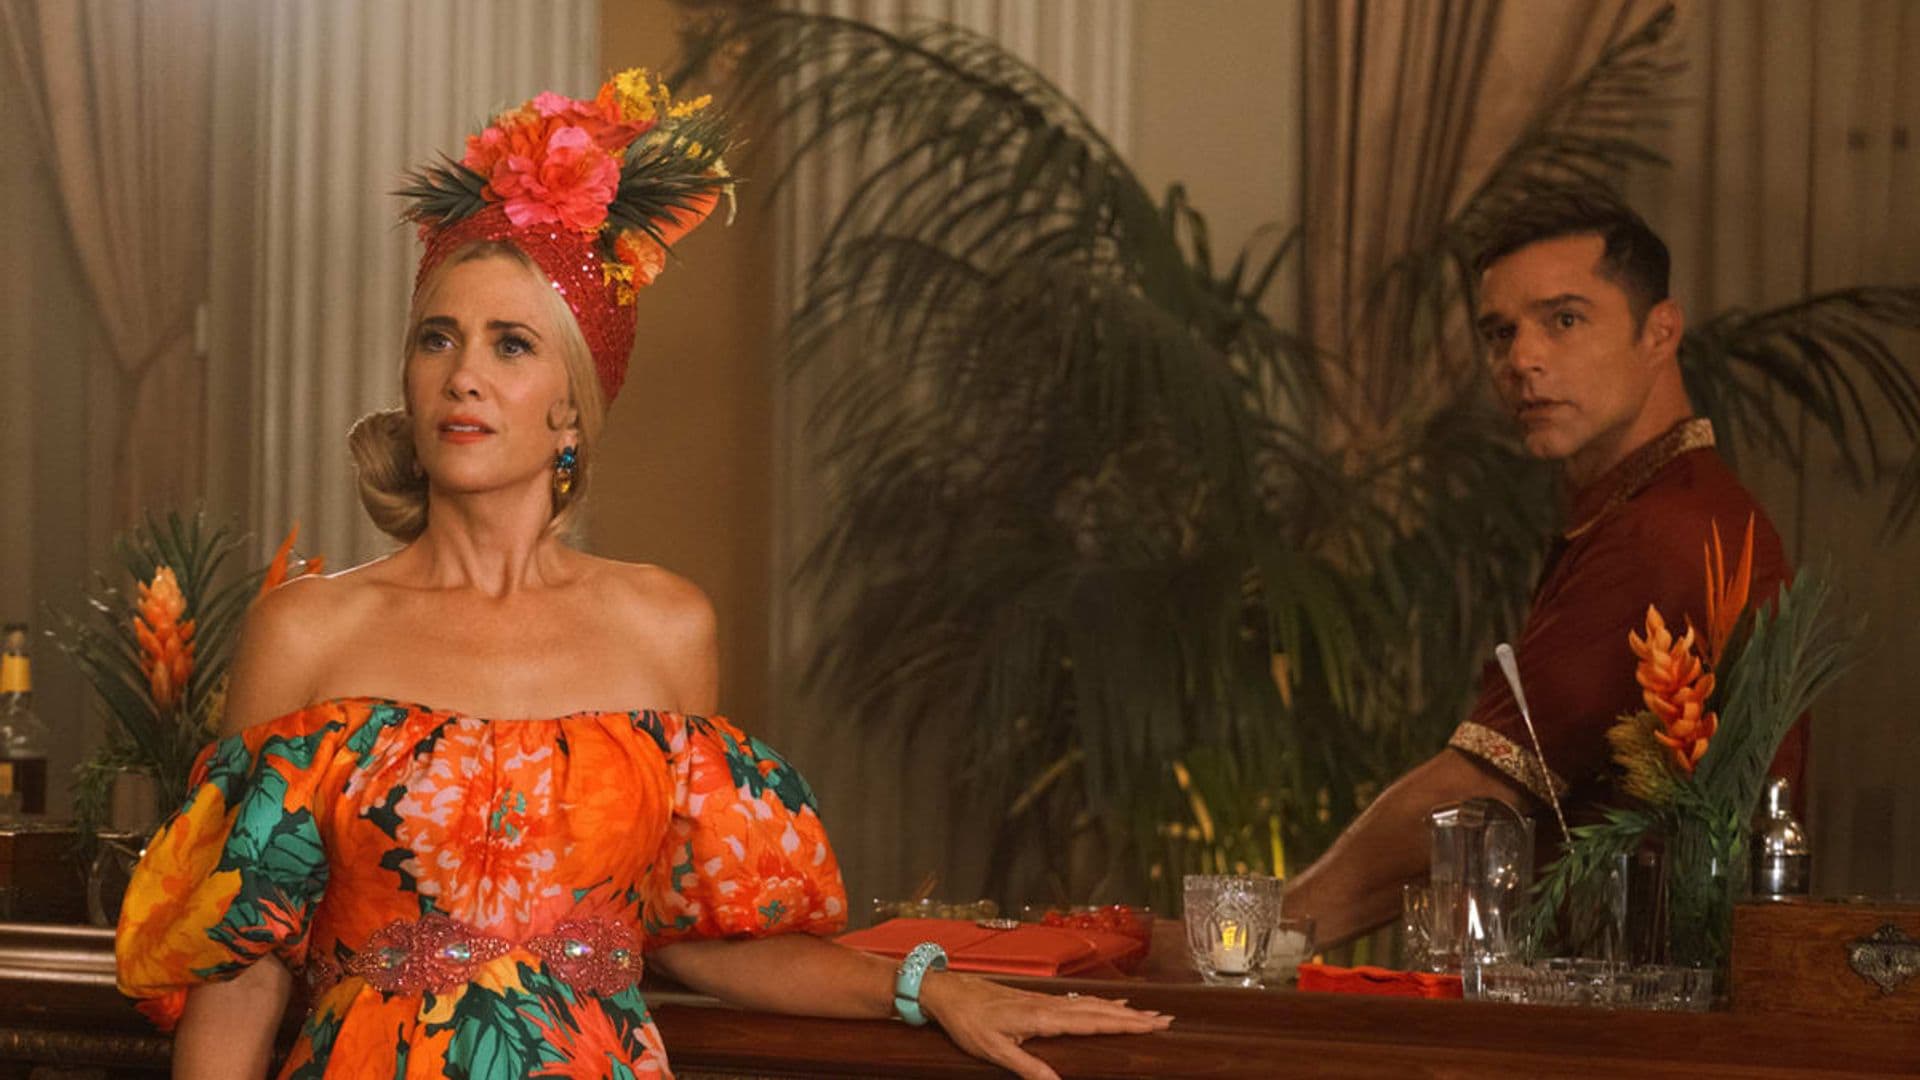 WATCH: Ricky Martin and Kristen Wiig in Carmen Miranda’s iconic look in exclusive ‘Palm Royale’ clip